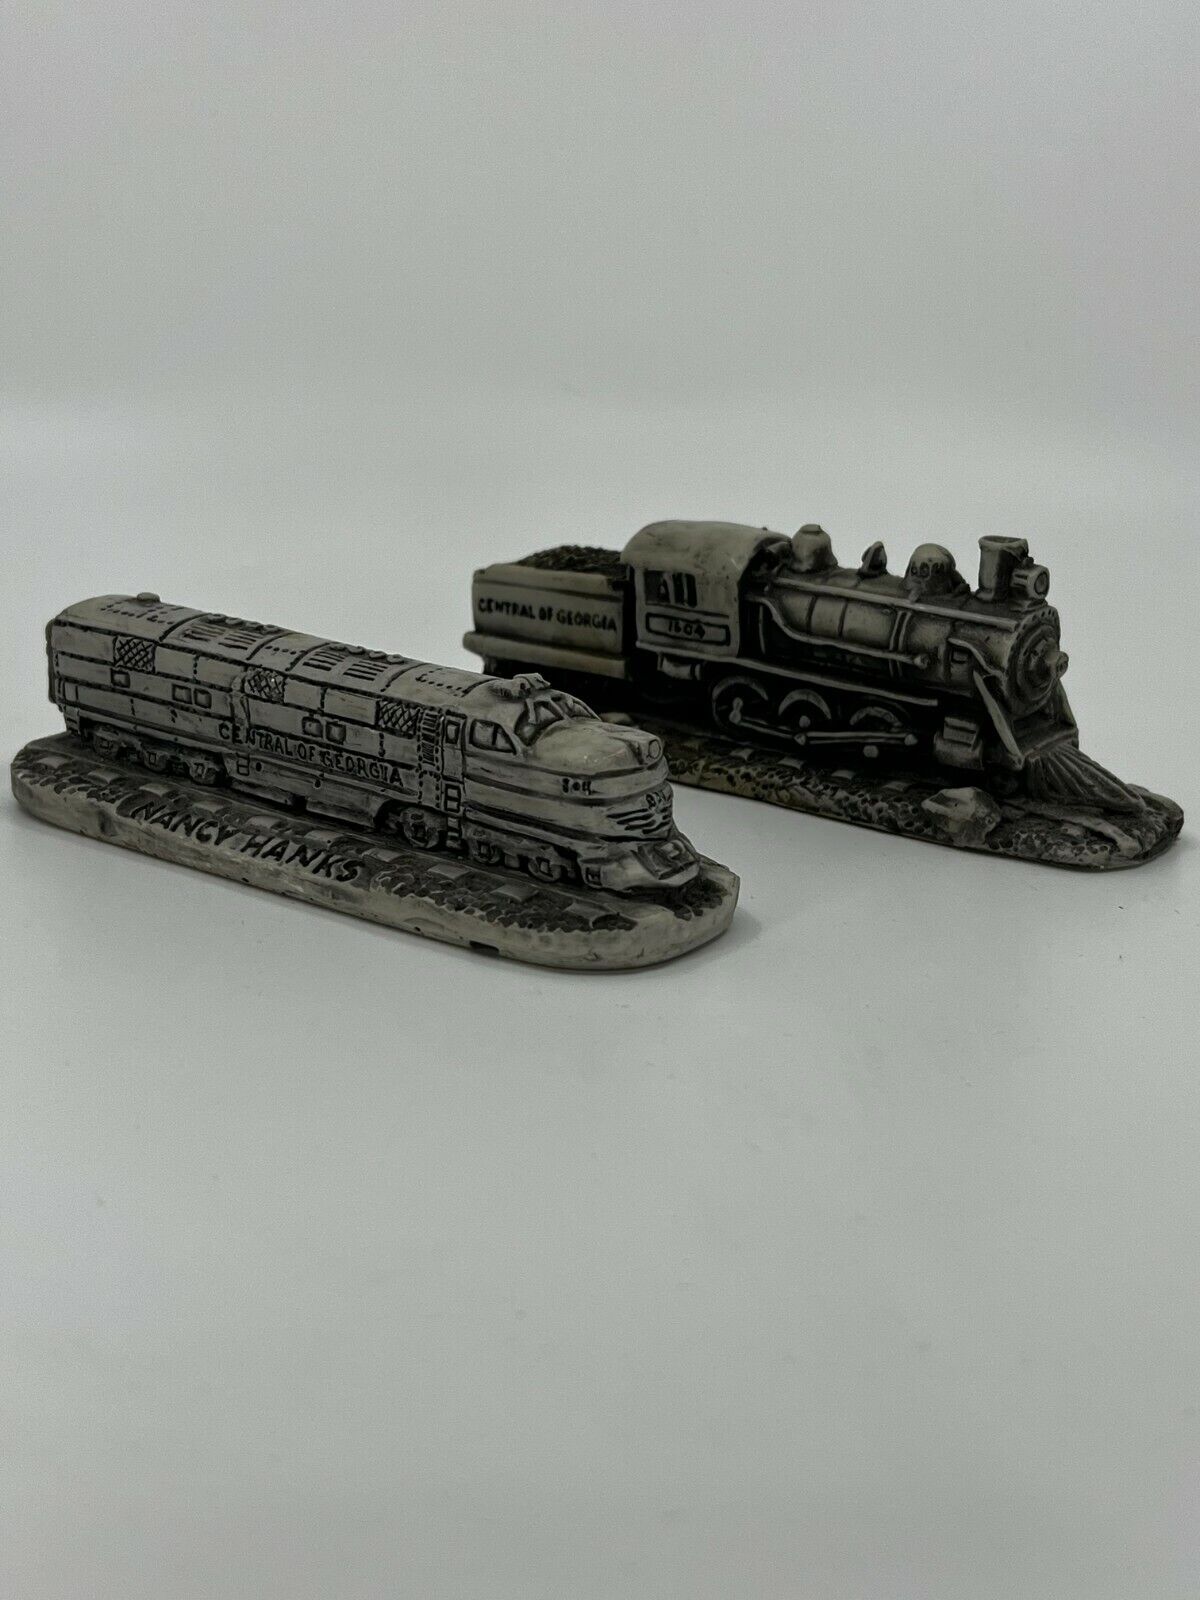 2 Vintage Train Replicas - Trains Goneby Numbered Limited Edition